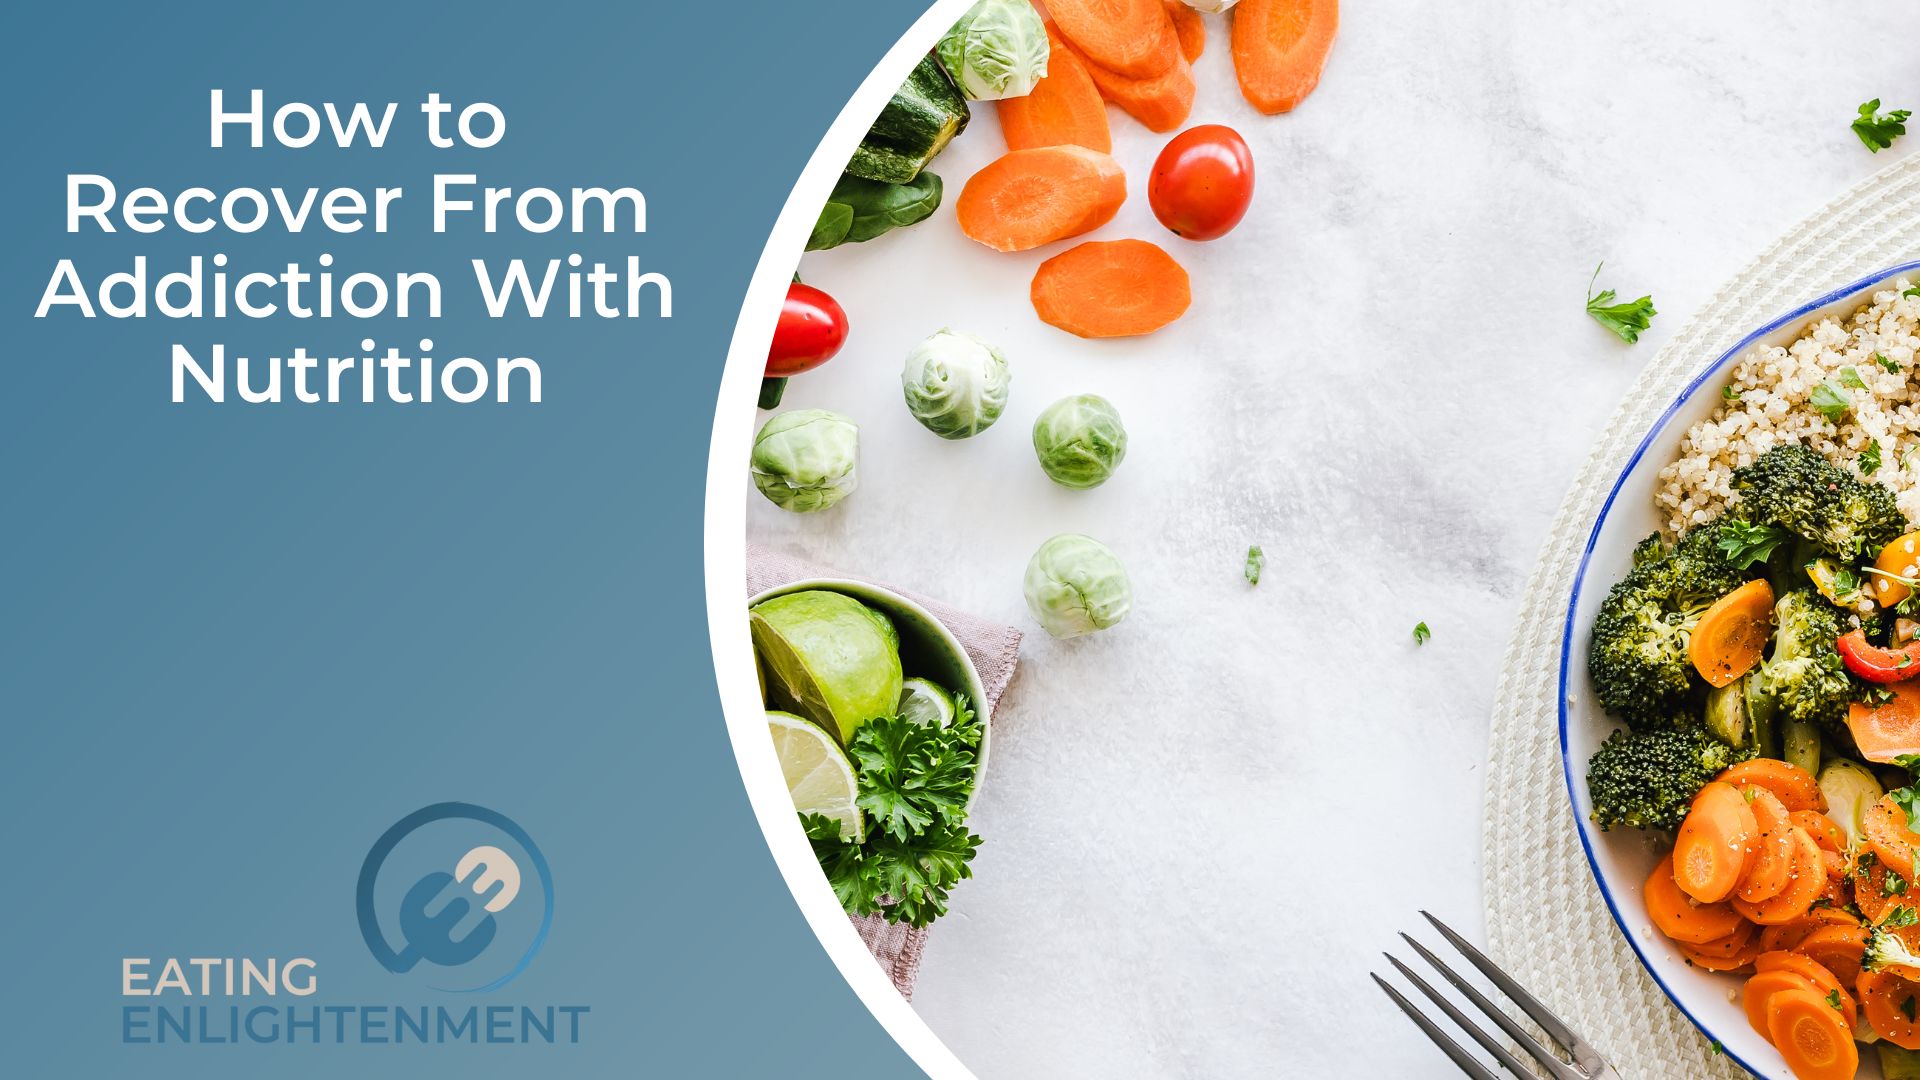 How to Recover From Addiction With Nutrition